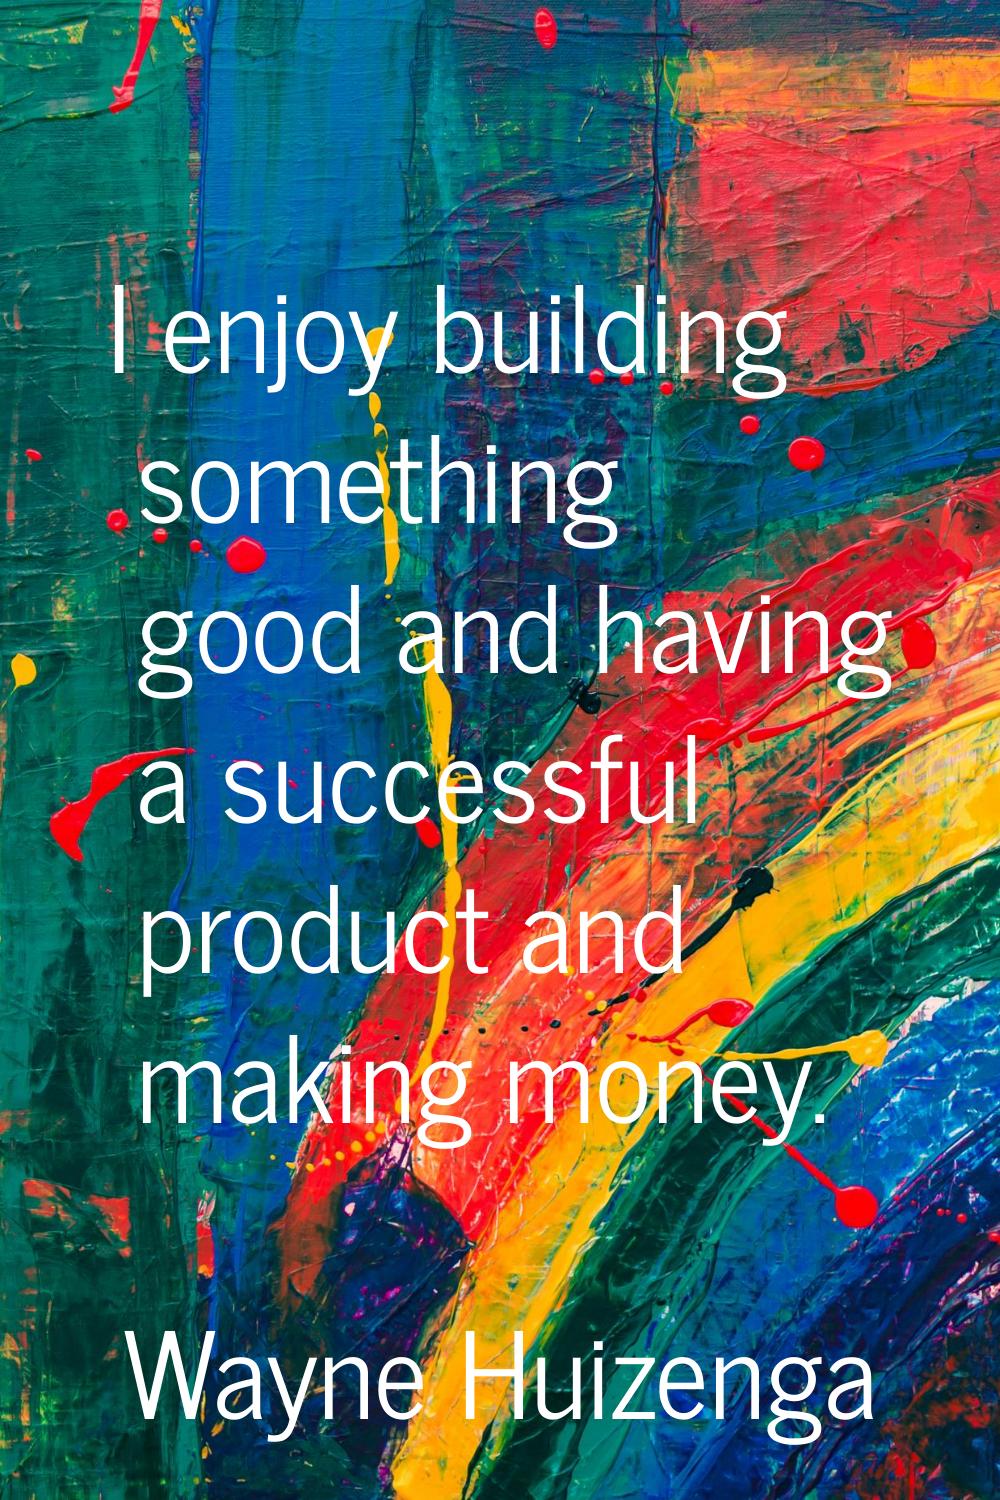 I enjoy building something good and having a successful product and making money.